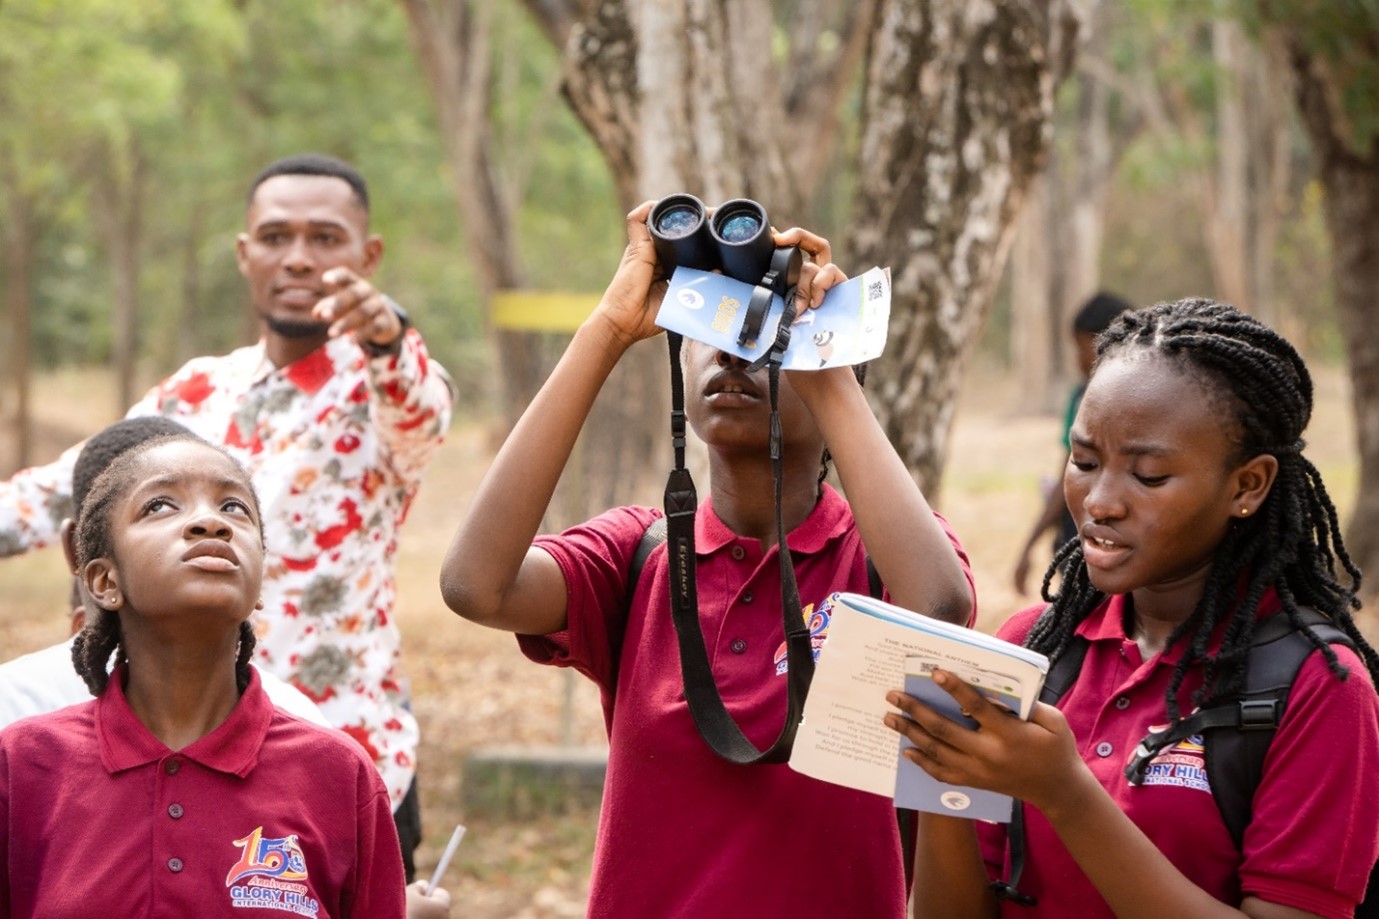 Pupils watch birds, one holds binoculars, one notes something down